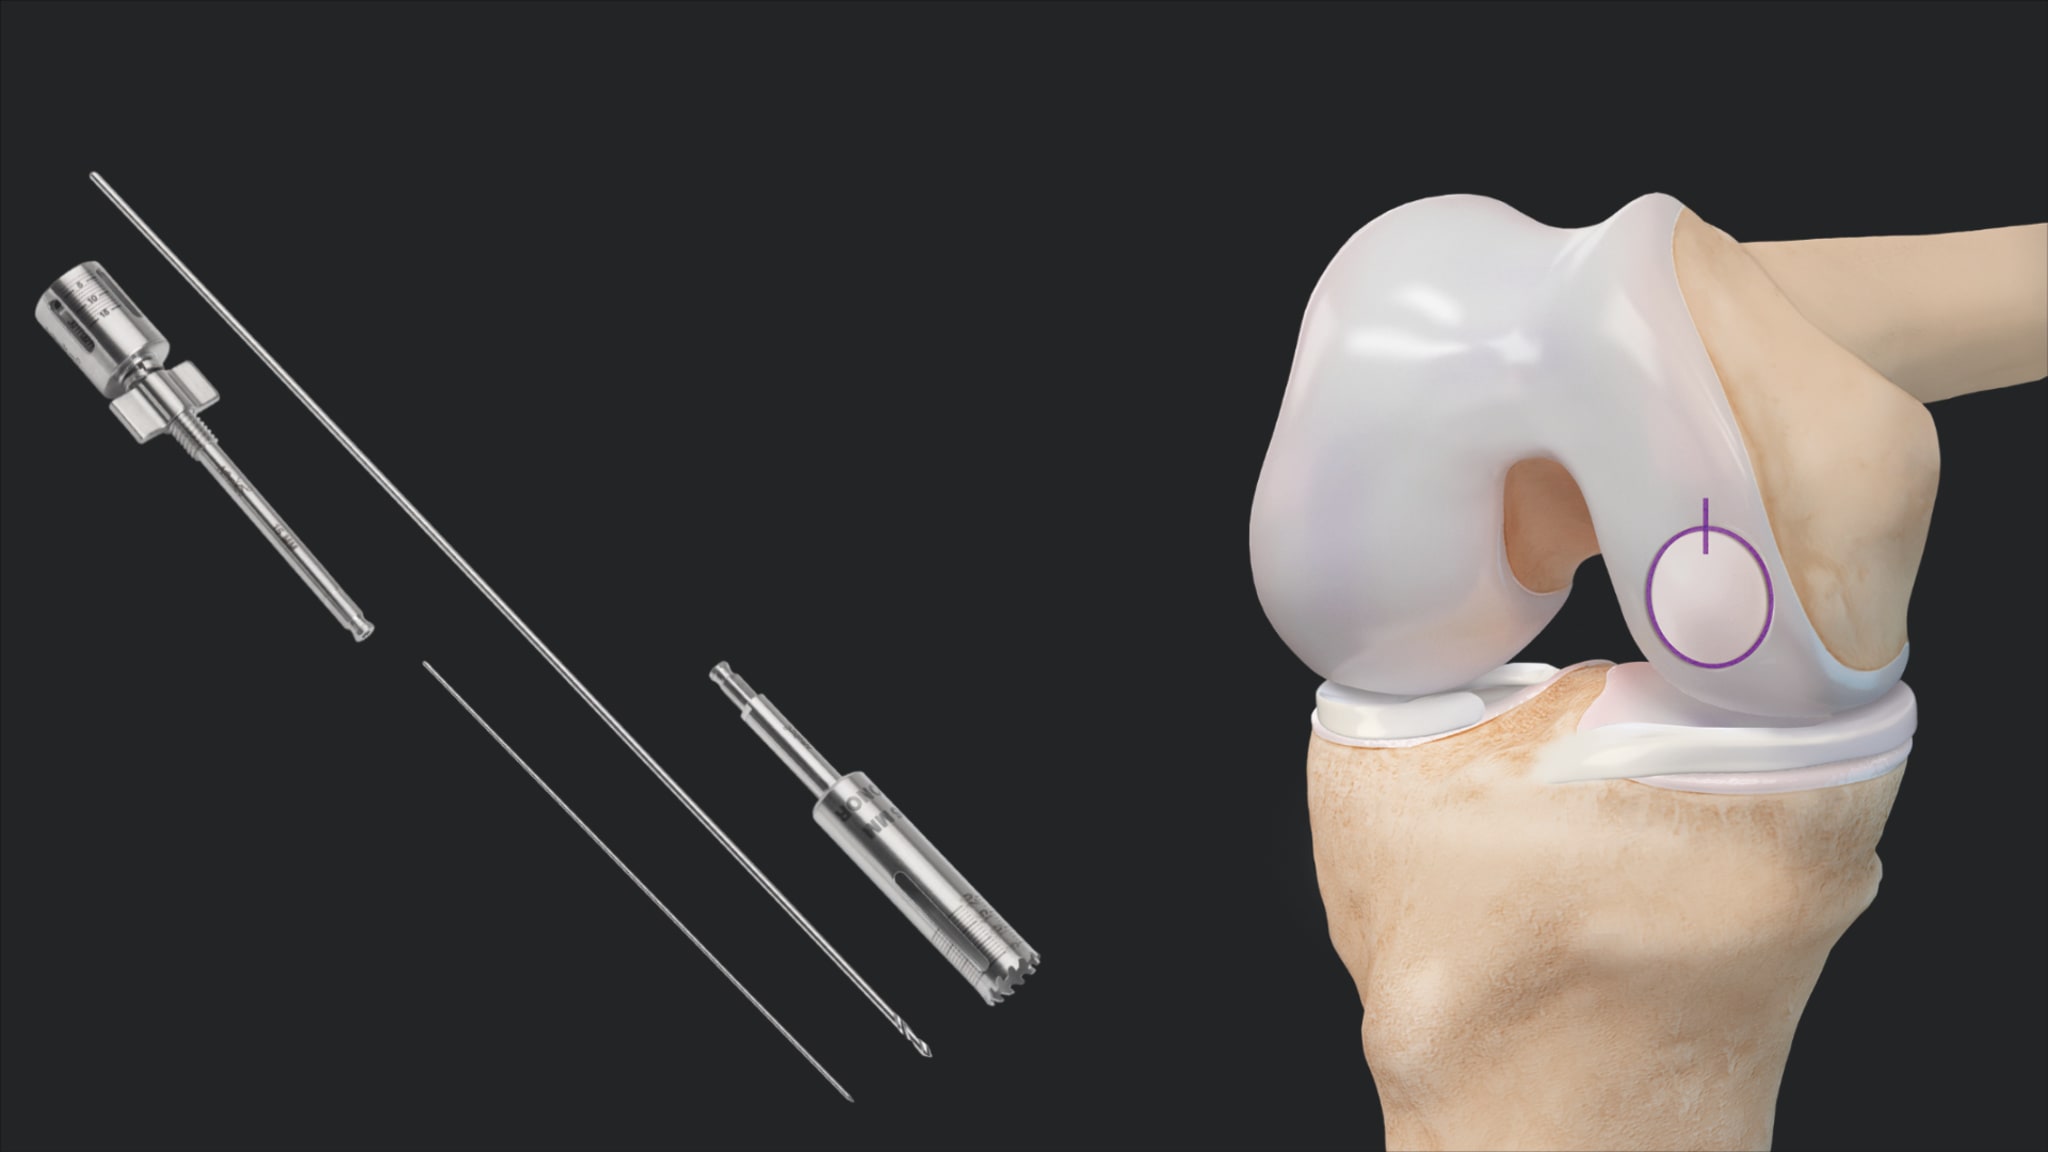 Treatment of a Femoral Condyle Cartilage Defect Using the Allograft OATS® Disposable Kit